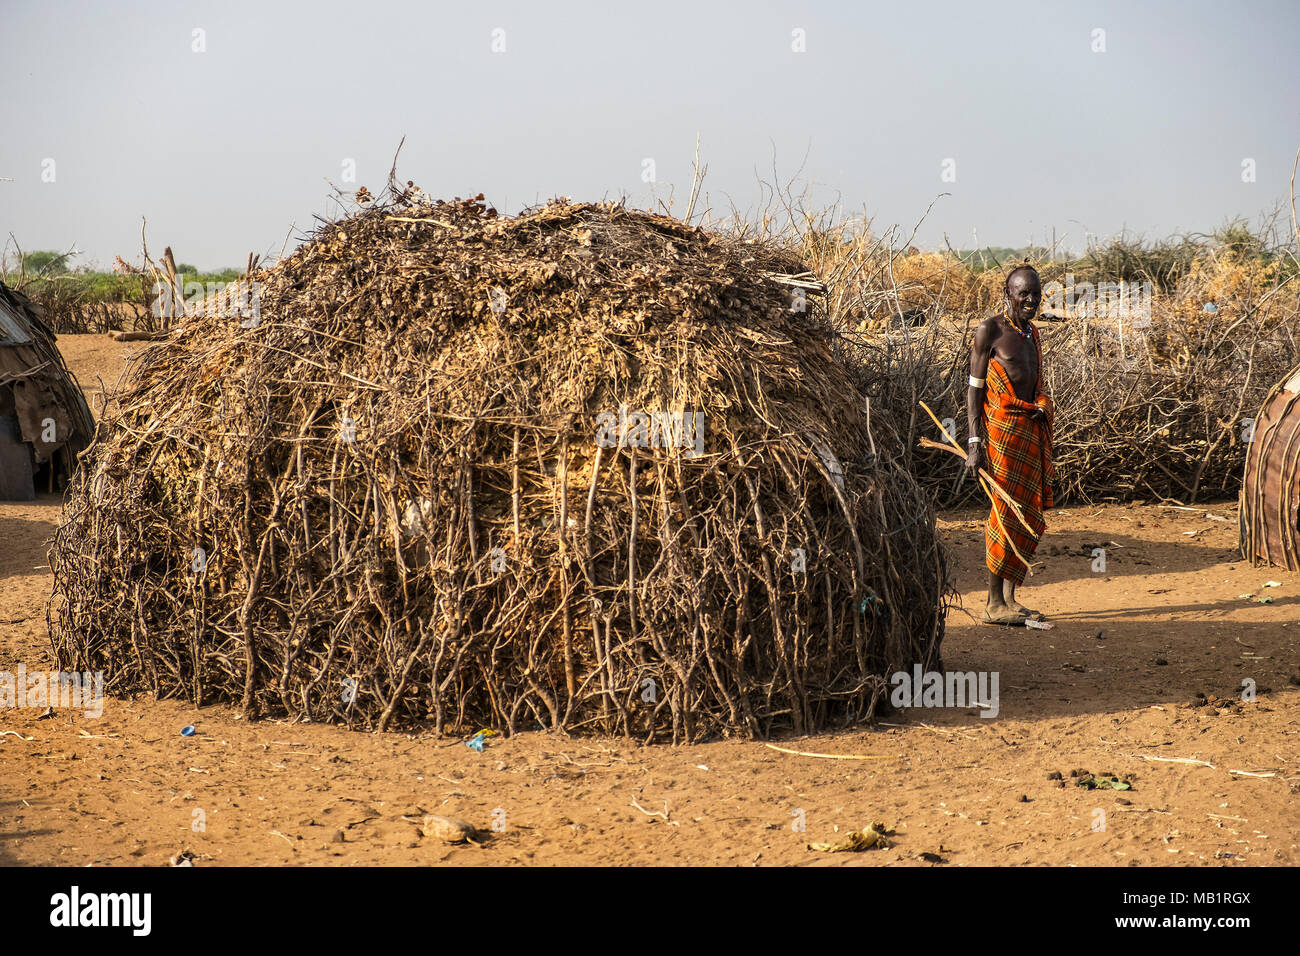 Omorate, Ethiopia - January 25, 2018: Man from the Dassanech tribe in his village next to his house in Ethiopia. Stock Photo